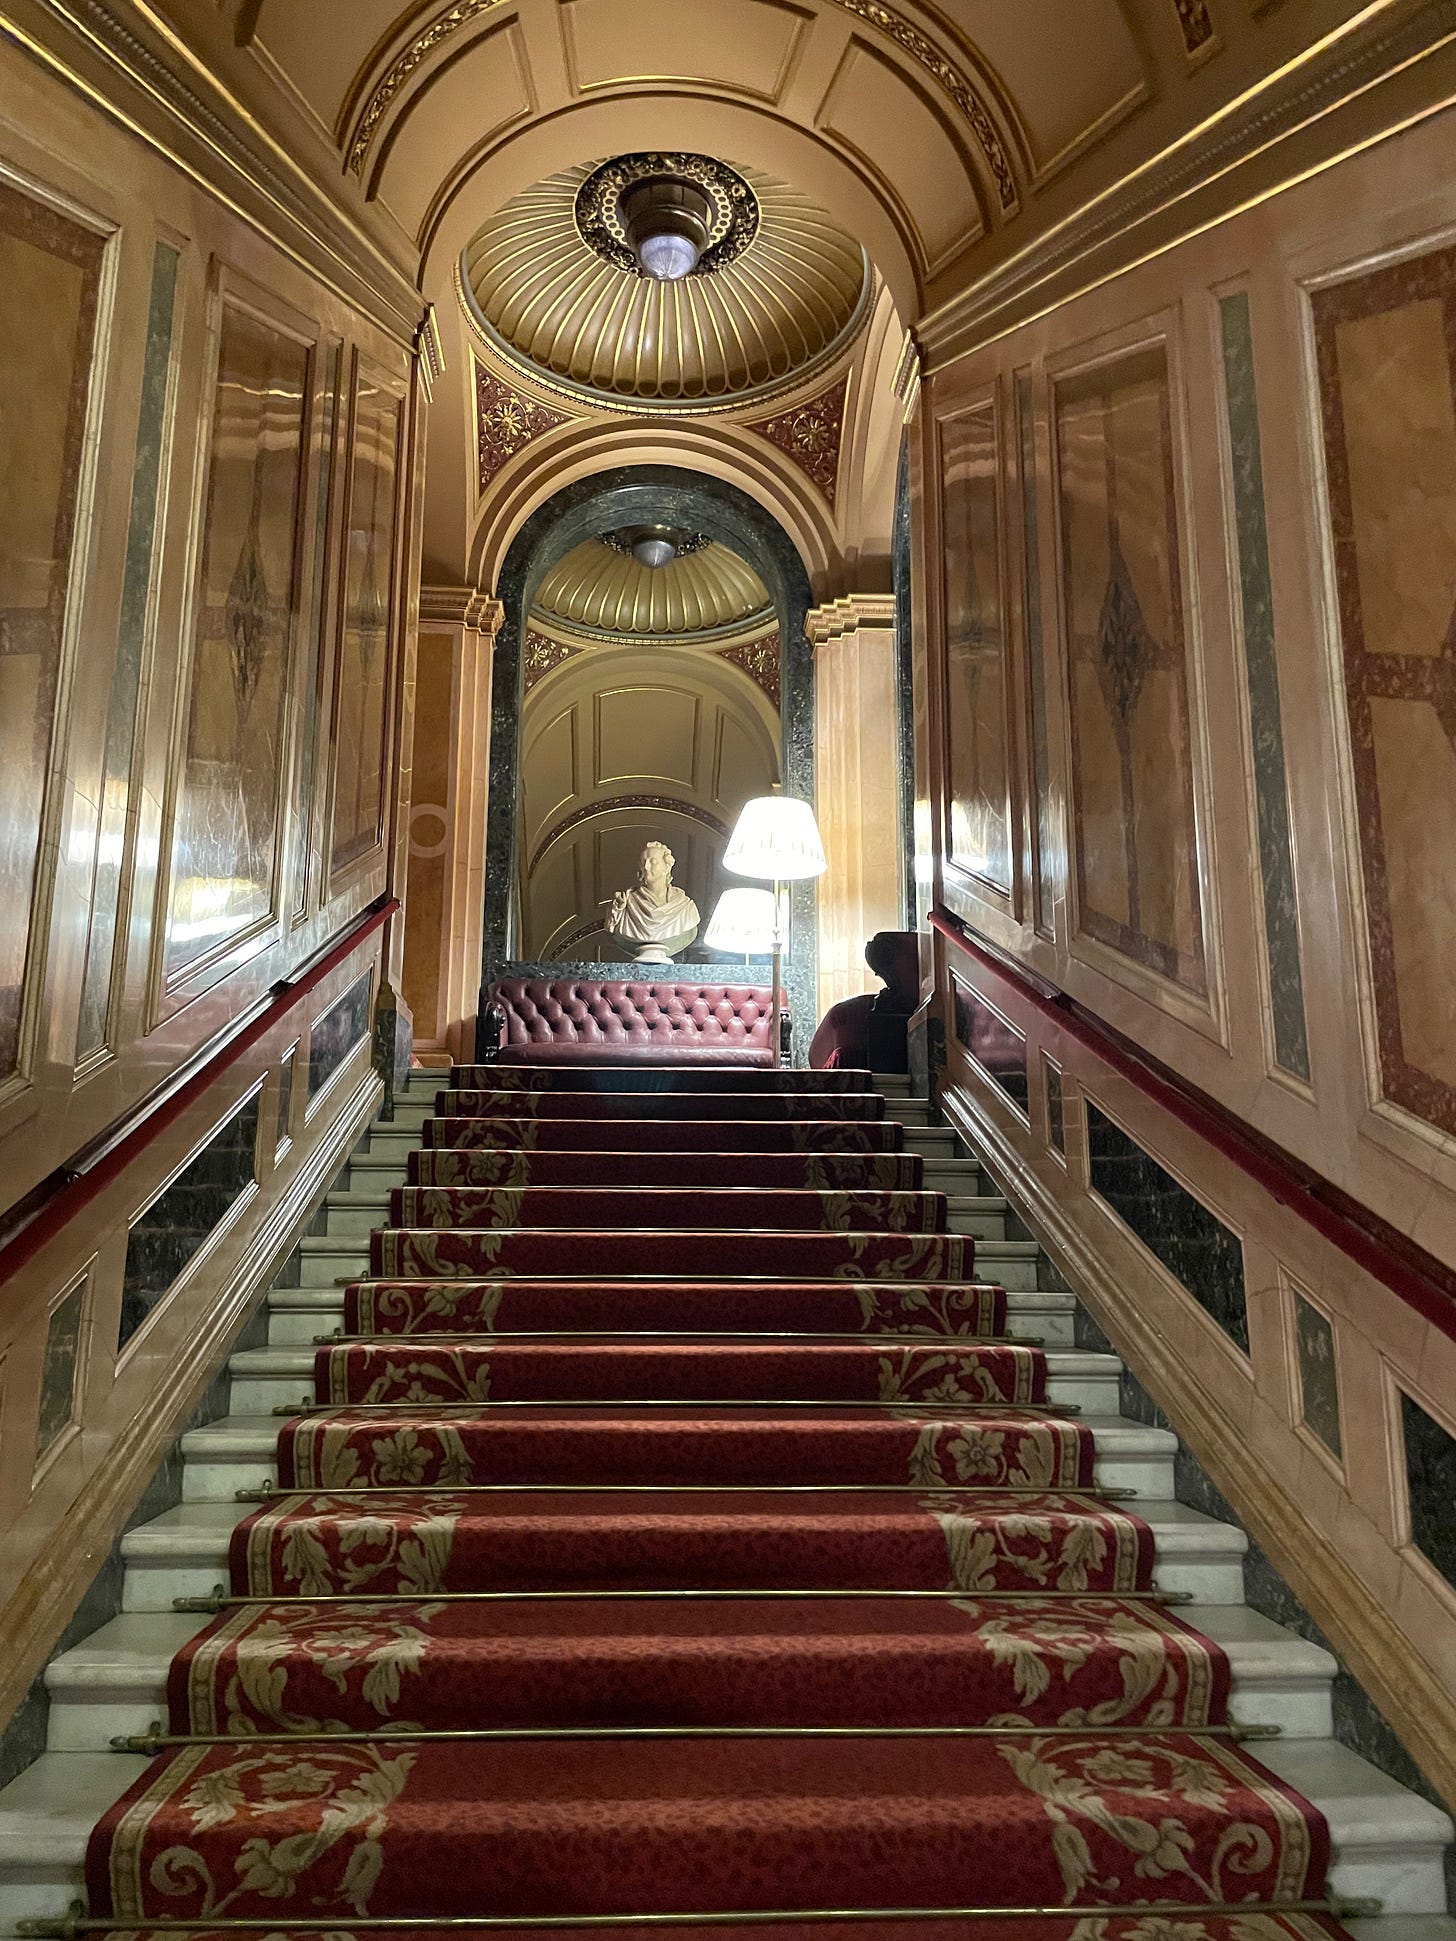 A grand staircase: red carpet, gold walls, and a marble bust at the top.